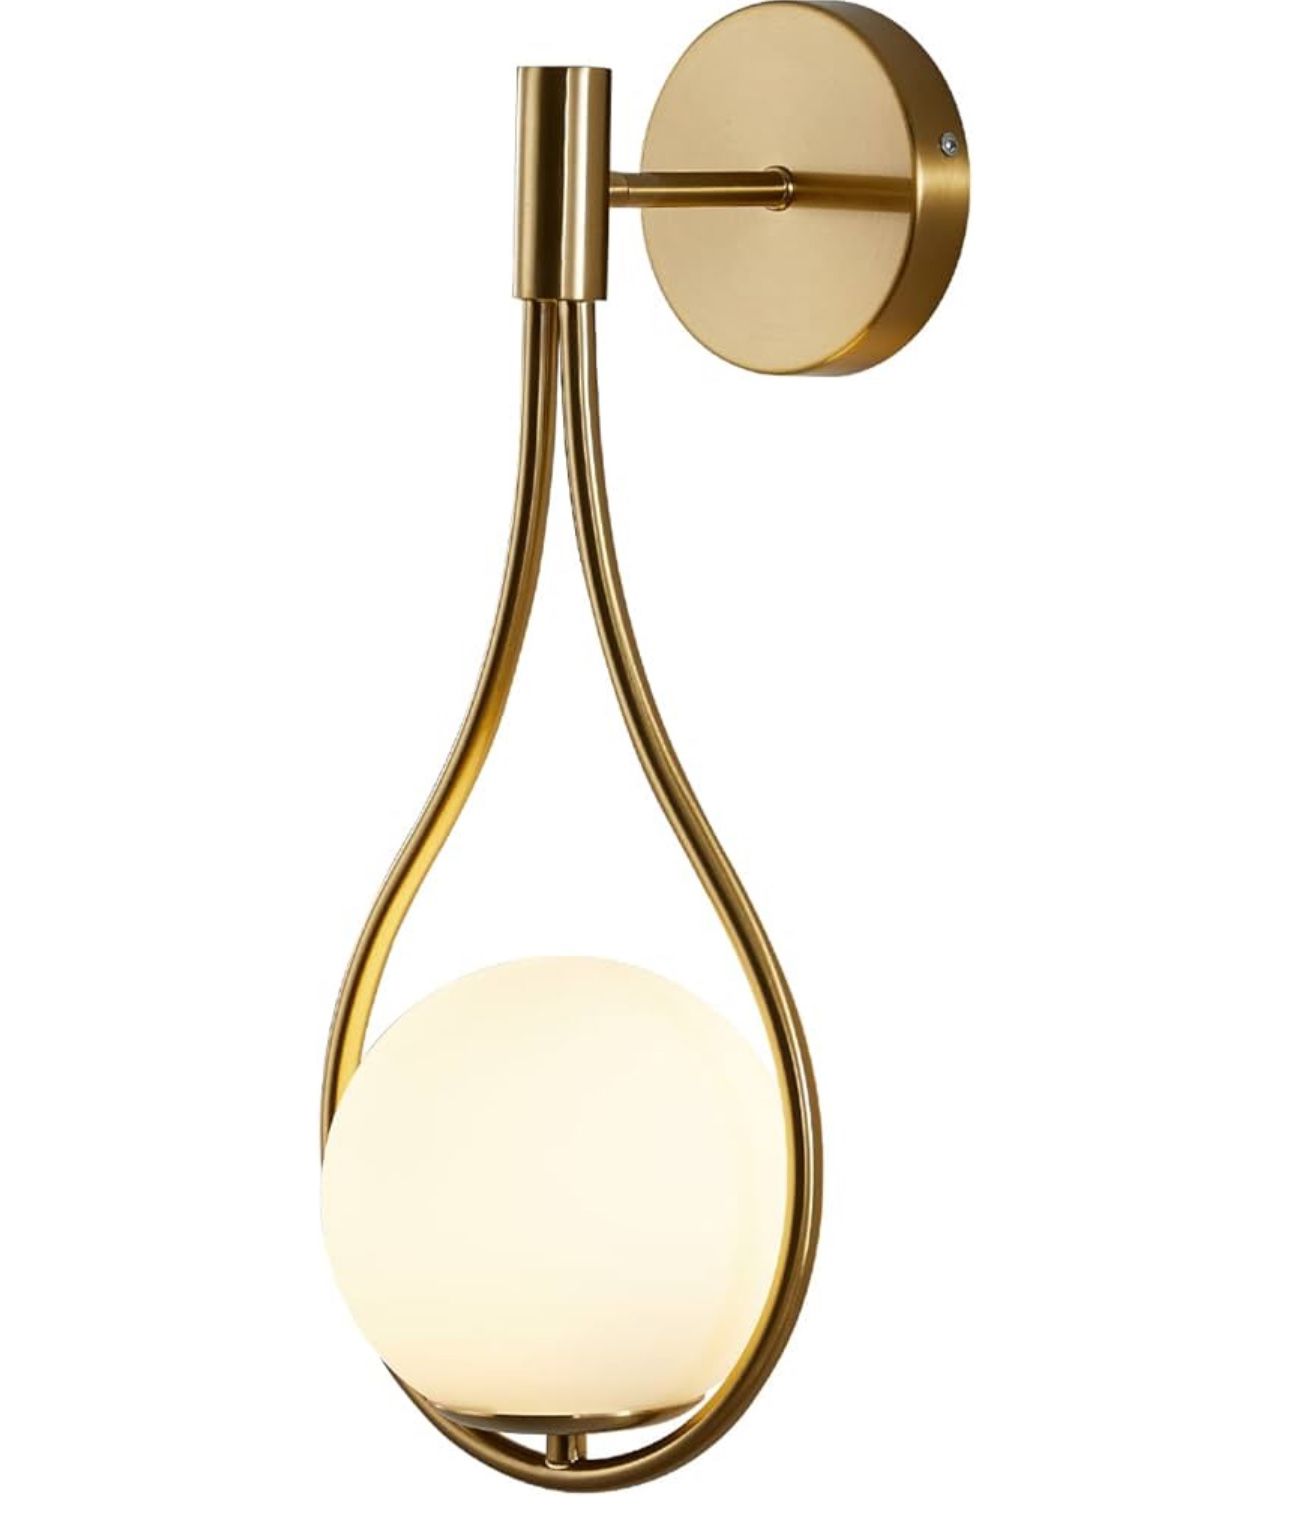 New KCO Lighting Wall Sconce Mid-Century Drop Design Wall Mounted Light Brushed Brass Wall Lamps